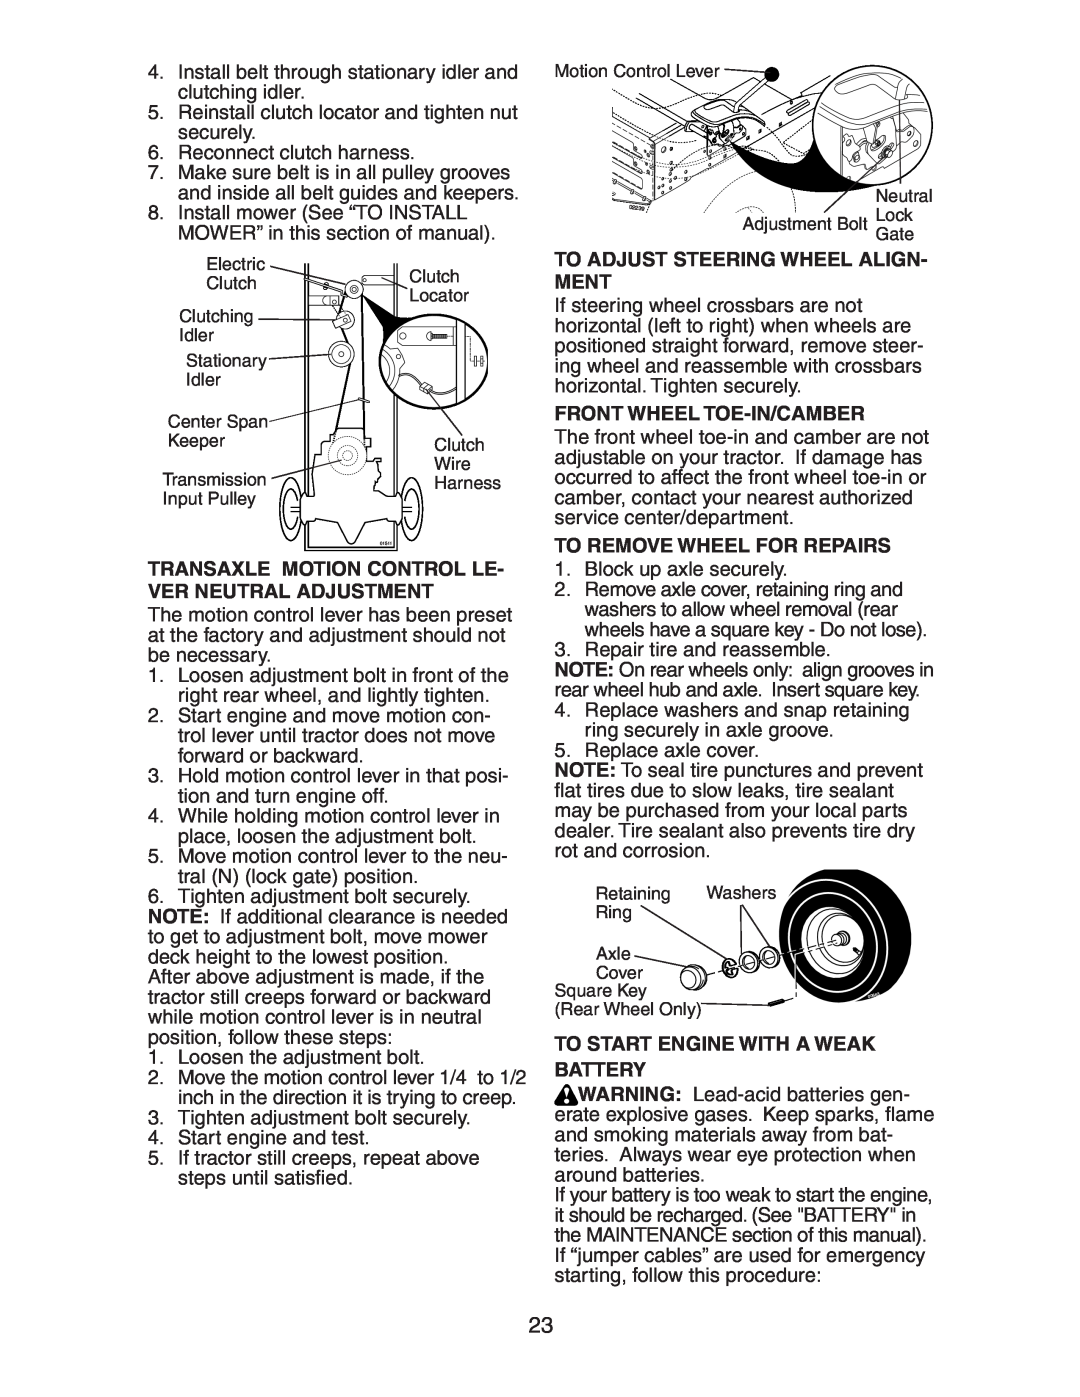 Poulan 193282 manual To Adjust Steering Wheel Align- Ment, Front Wheel Toe-In/Camber, To Remove Wheel For Repairs 